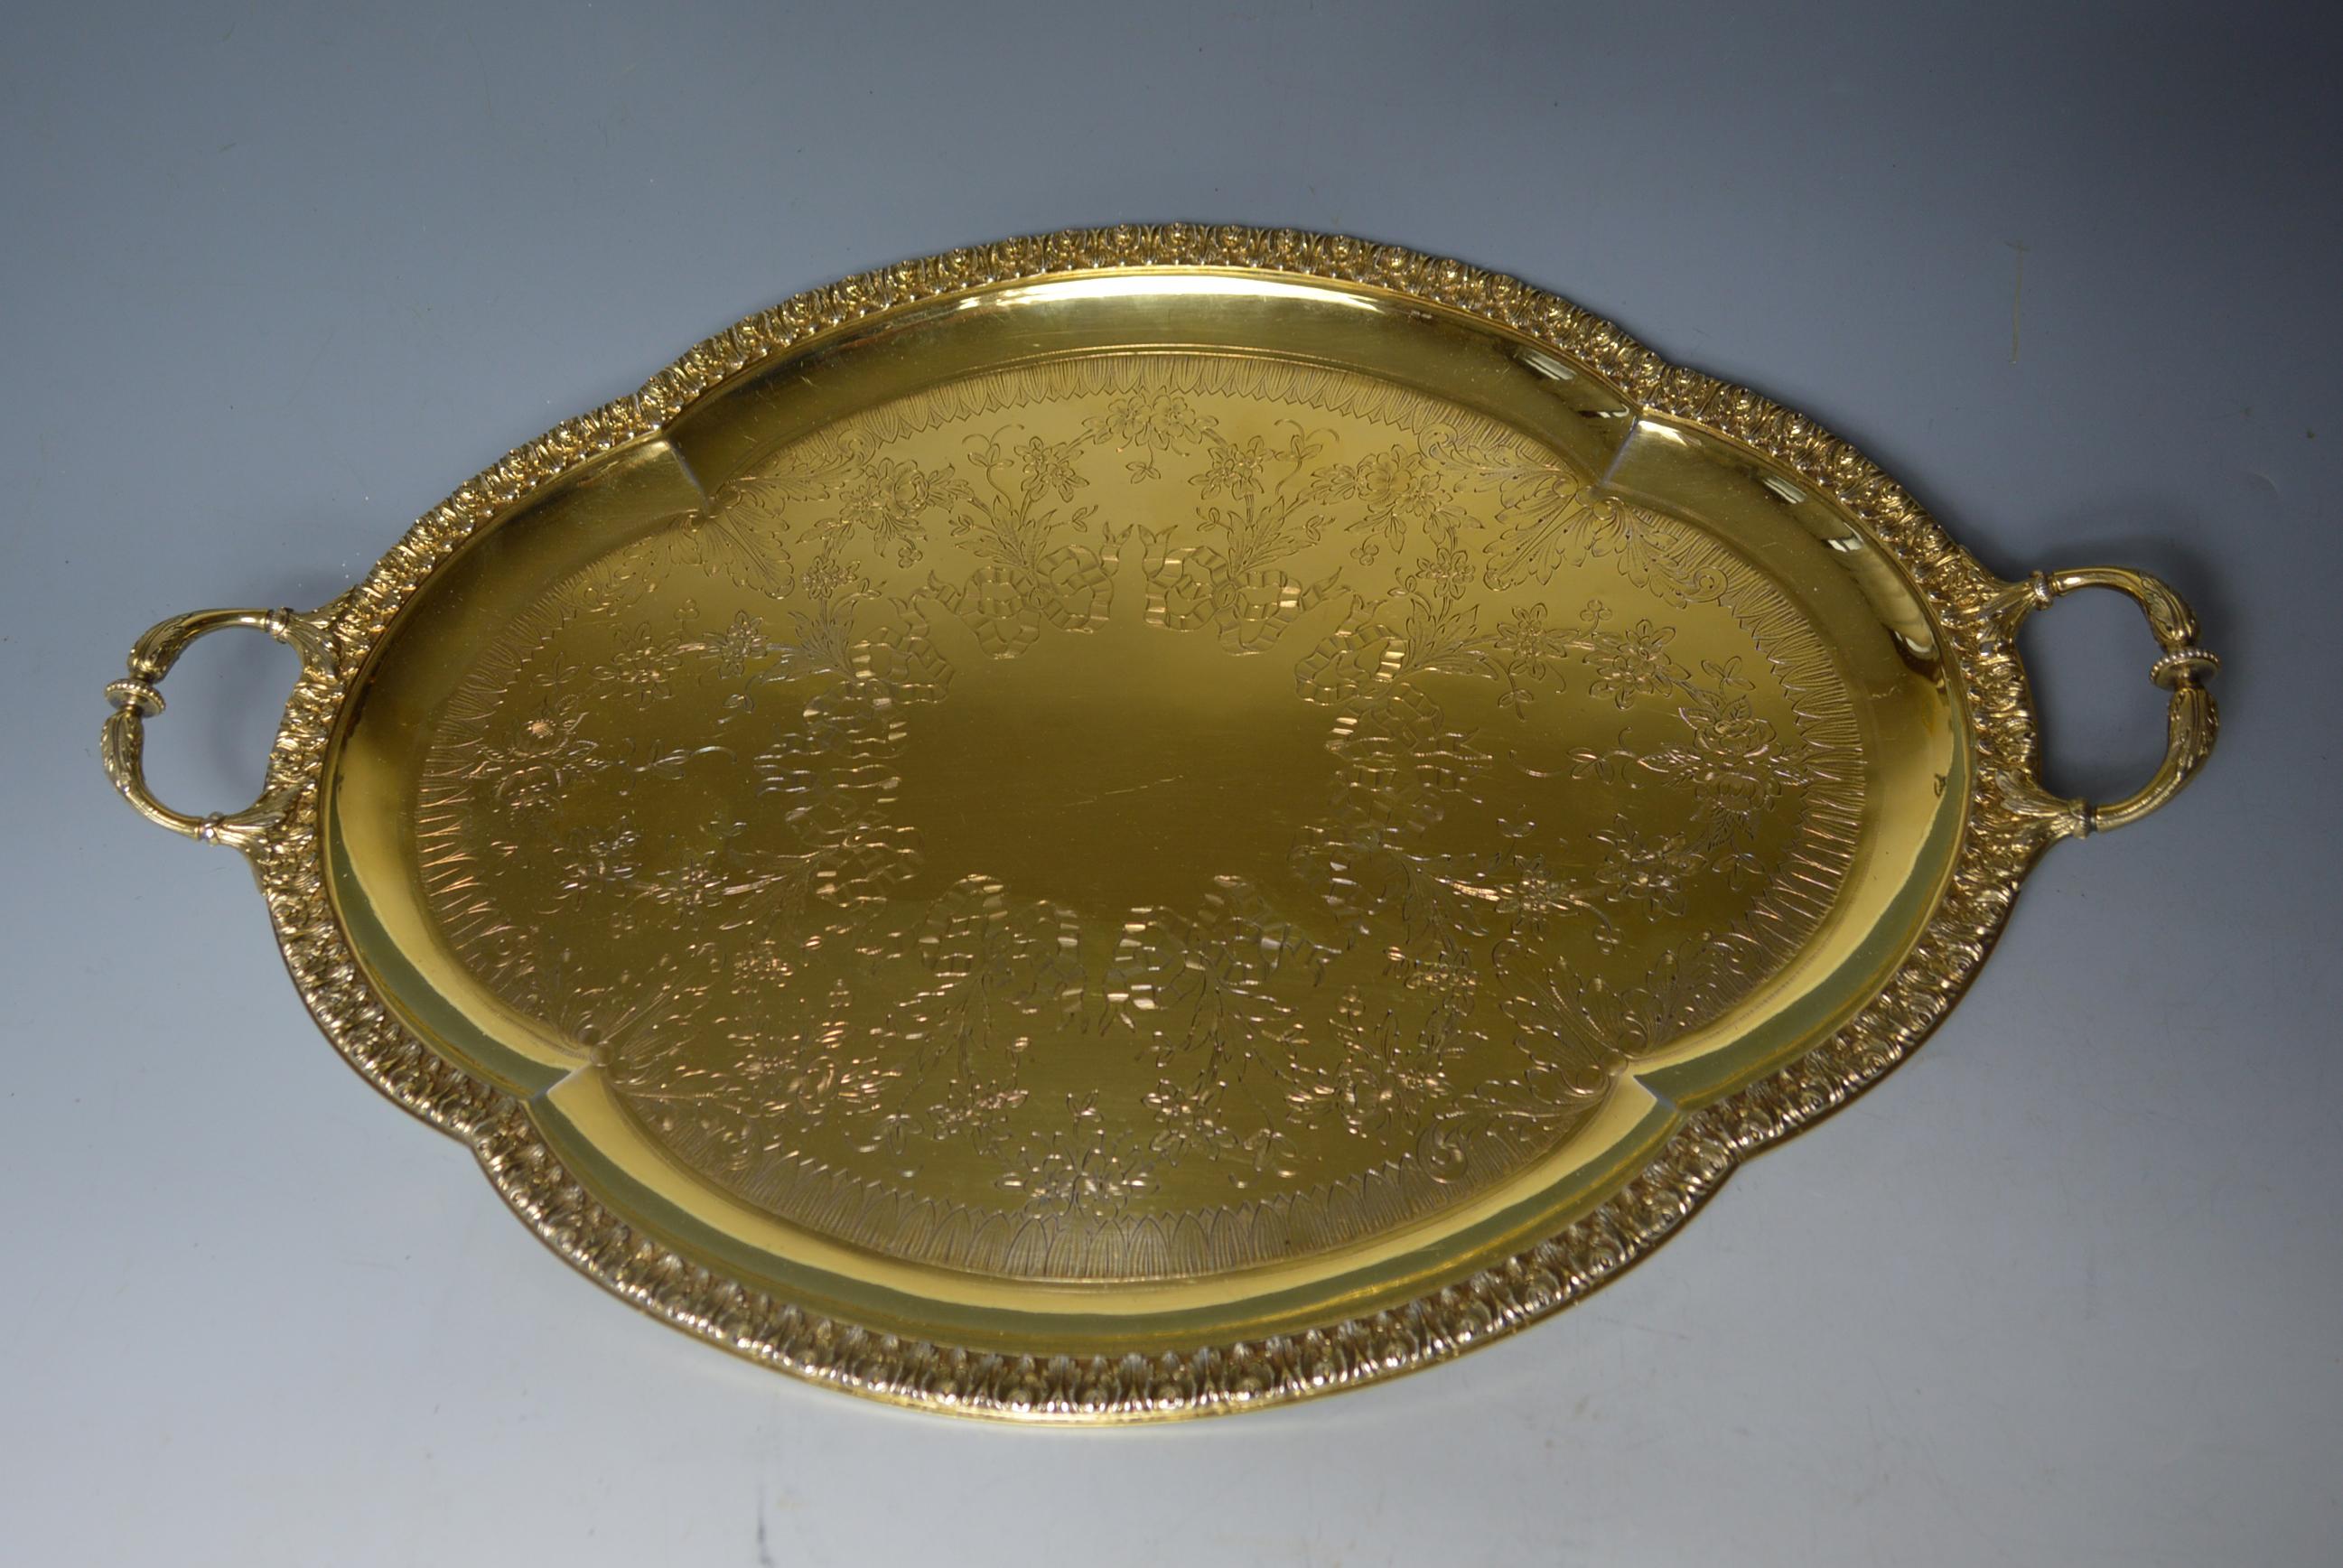 Superb large French two handled silver gilt serving tray Leon Lapar Paris

The large tray modeled with four lobes the edge engraved with floral branches and chiseled acanthus leaves
with flowering branches and wrapped knots

Measures: Length 54